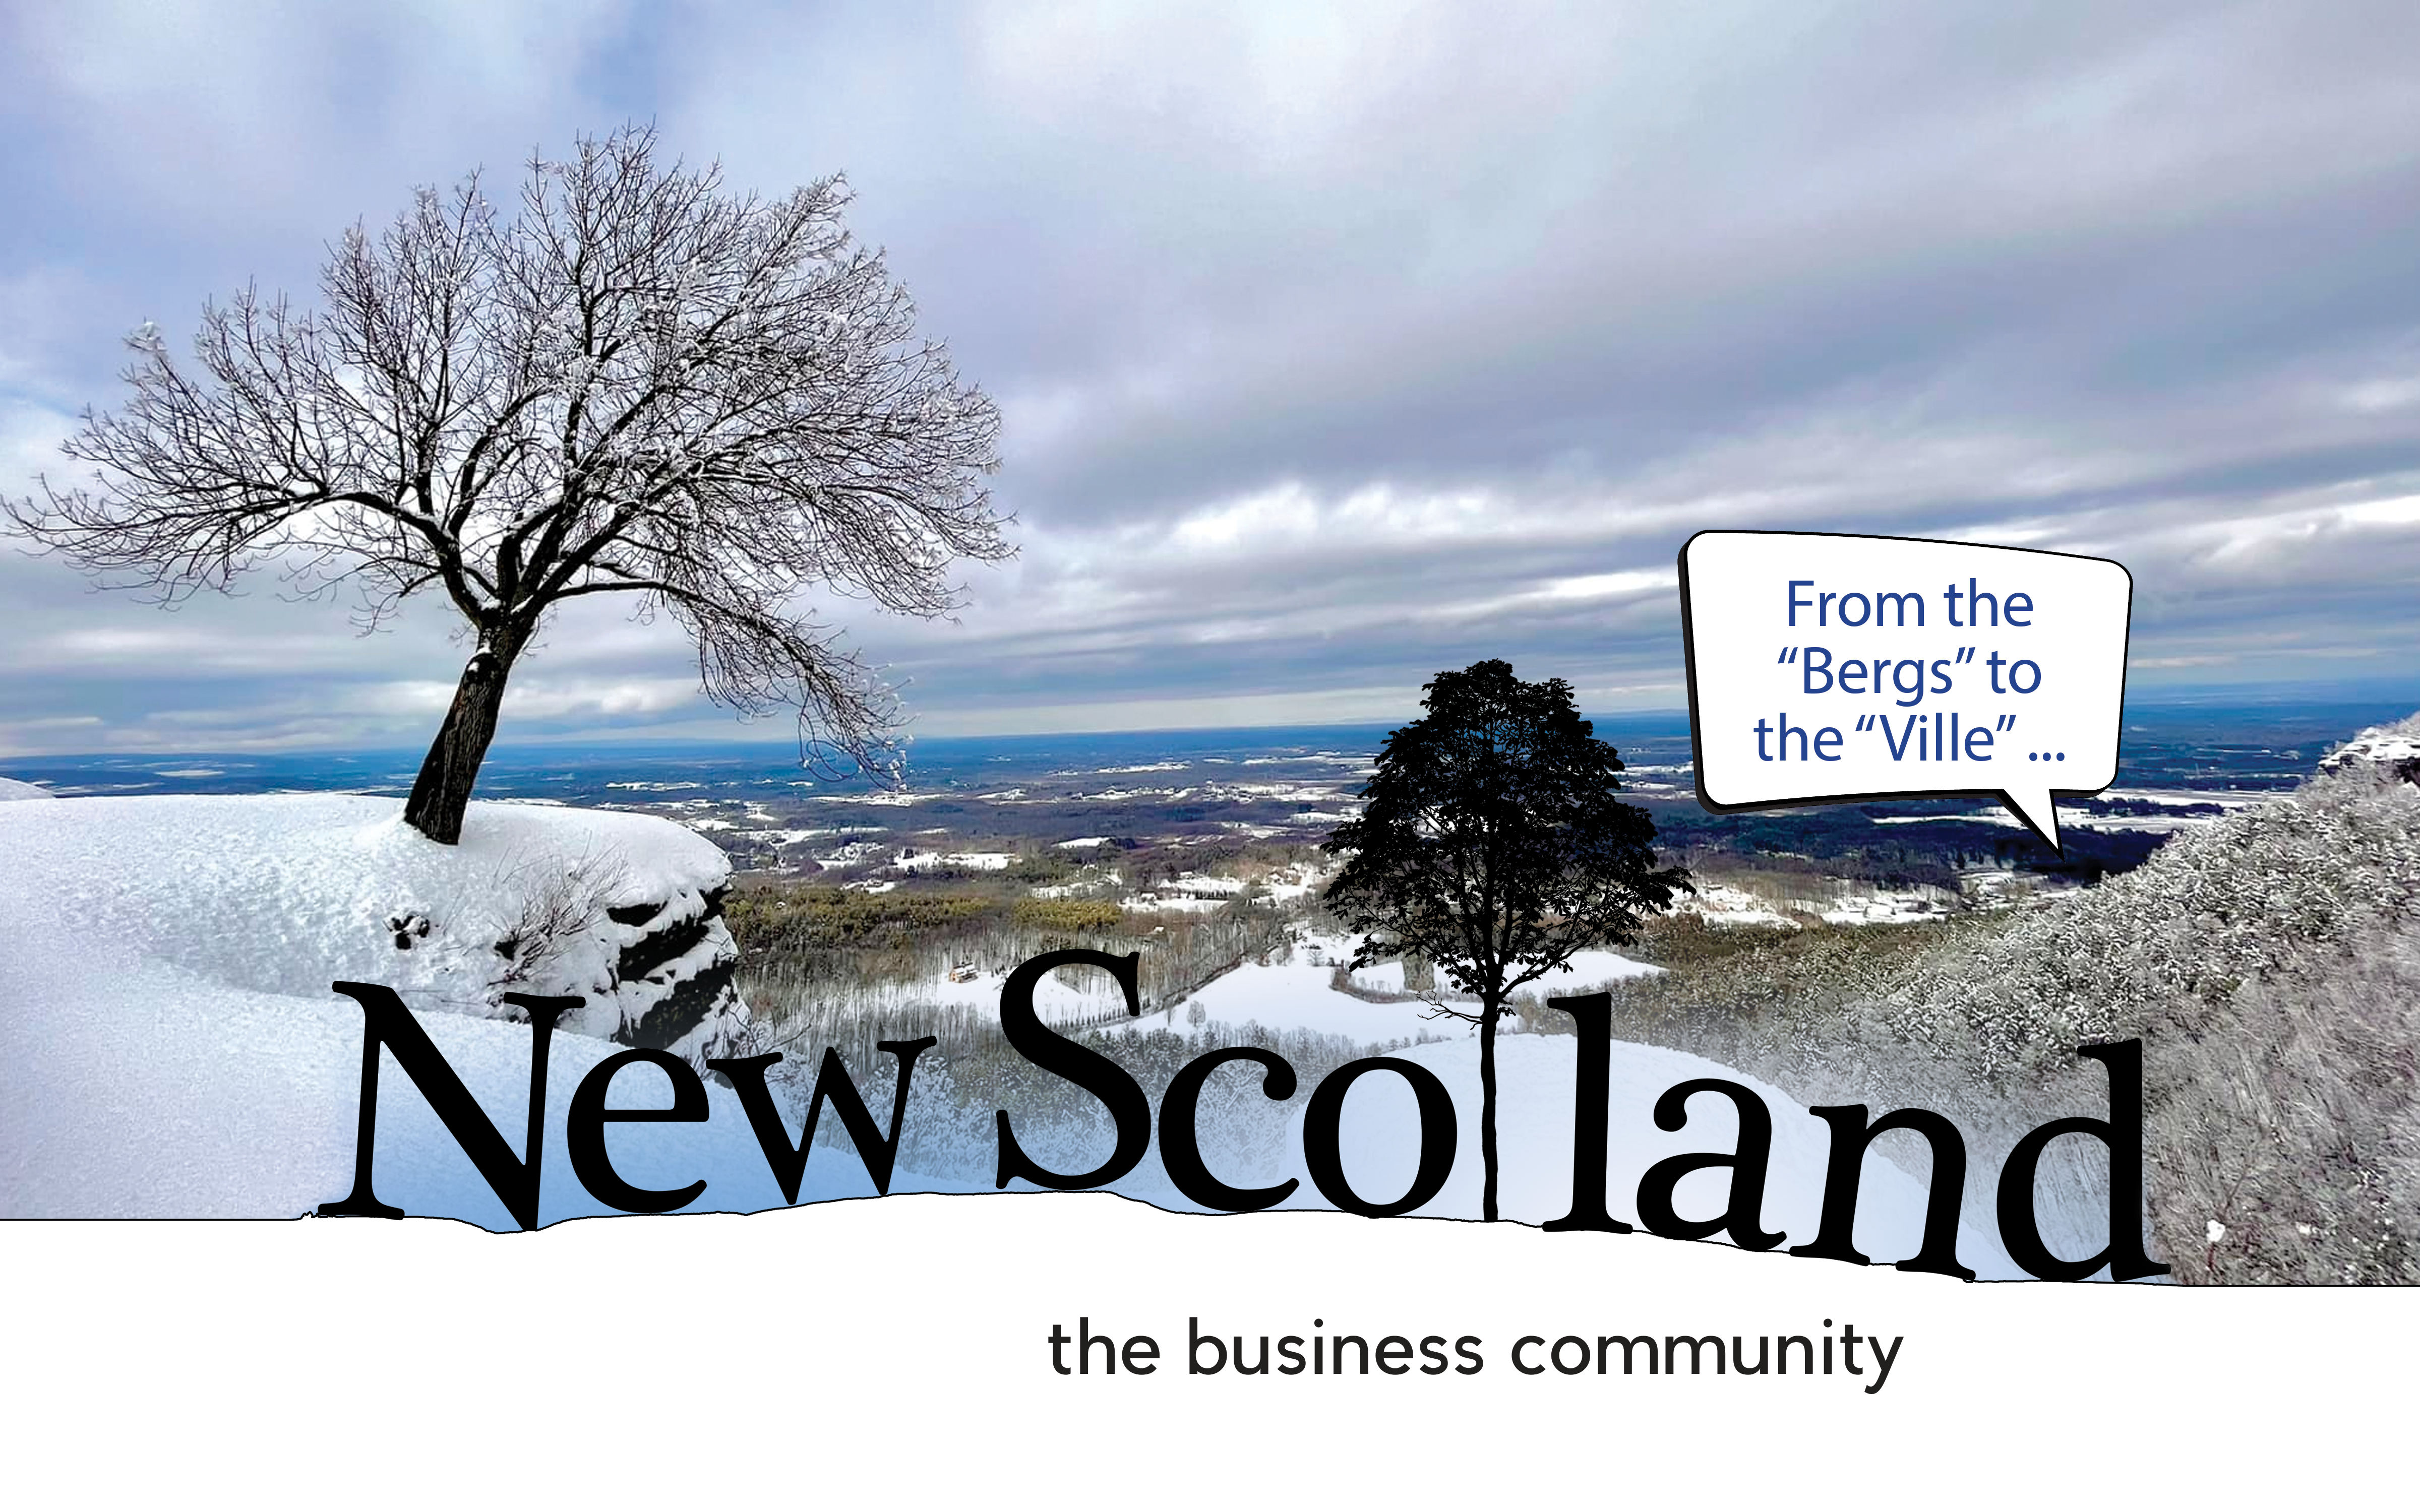 Our New Scotland Newsletters from the Helderbergs to Voorheesville and throughout New Scotland